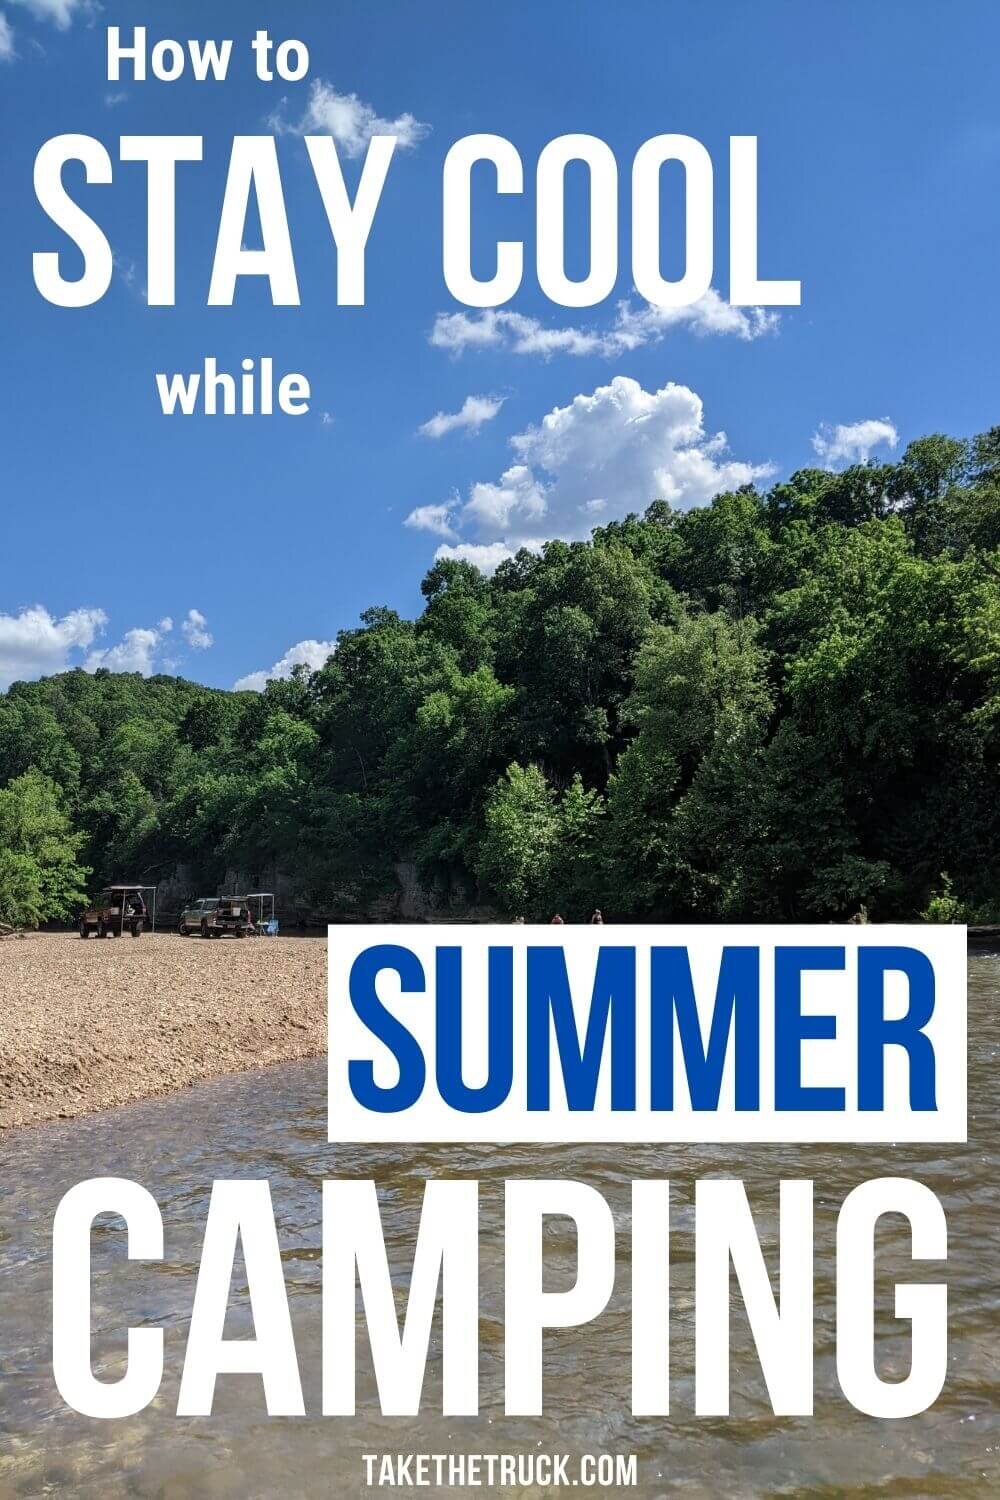 Products and tips on how to stay cool while camping in the heat. Summer camping in hot weather in a tent or truck bed, van, SUV, or car doesn't have to be miserable!